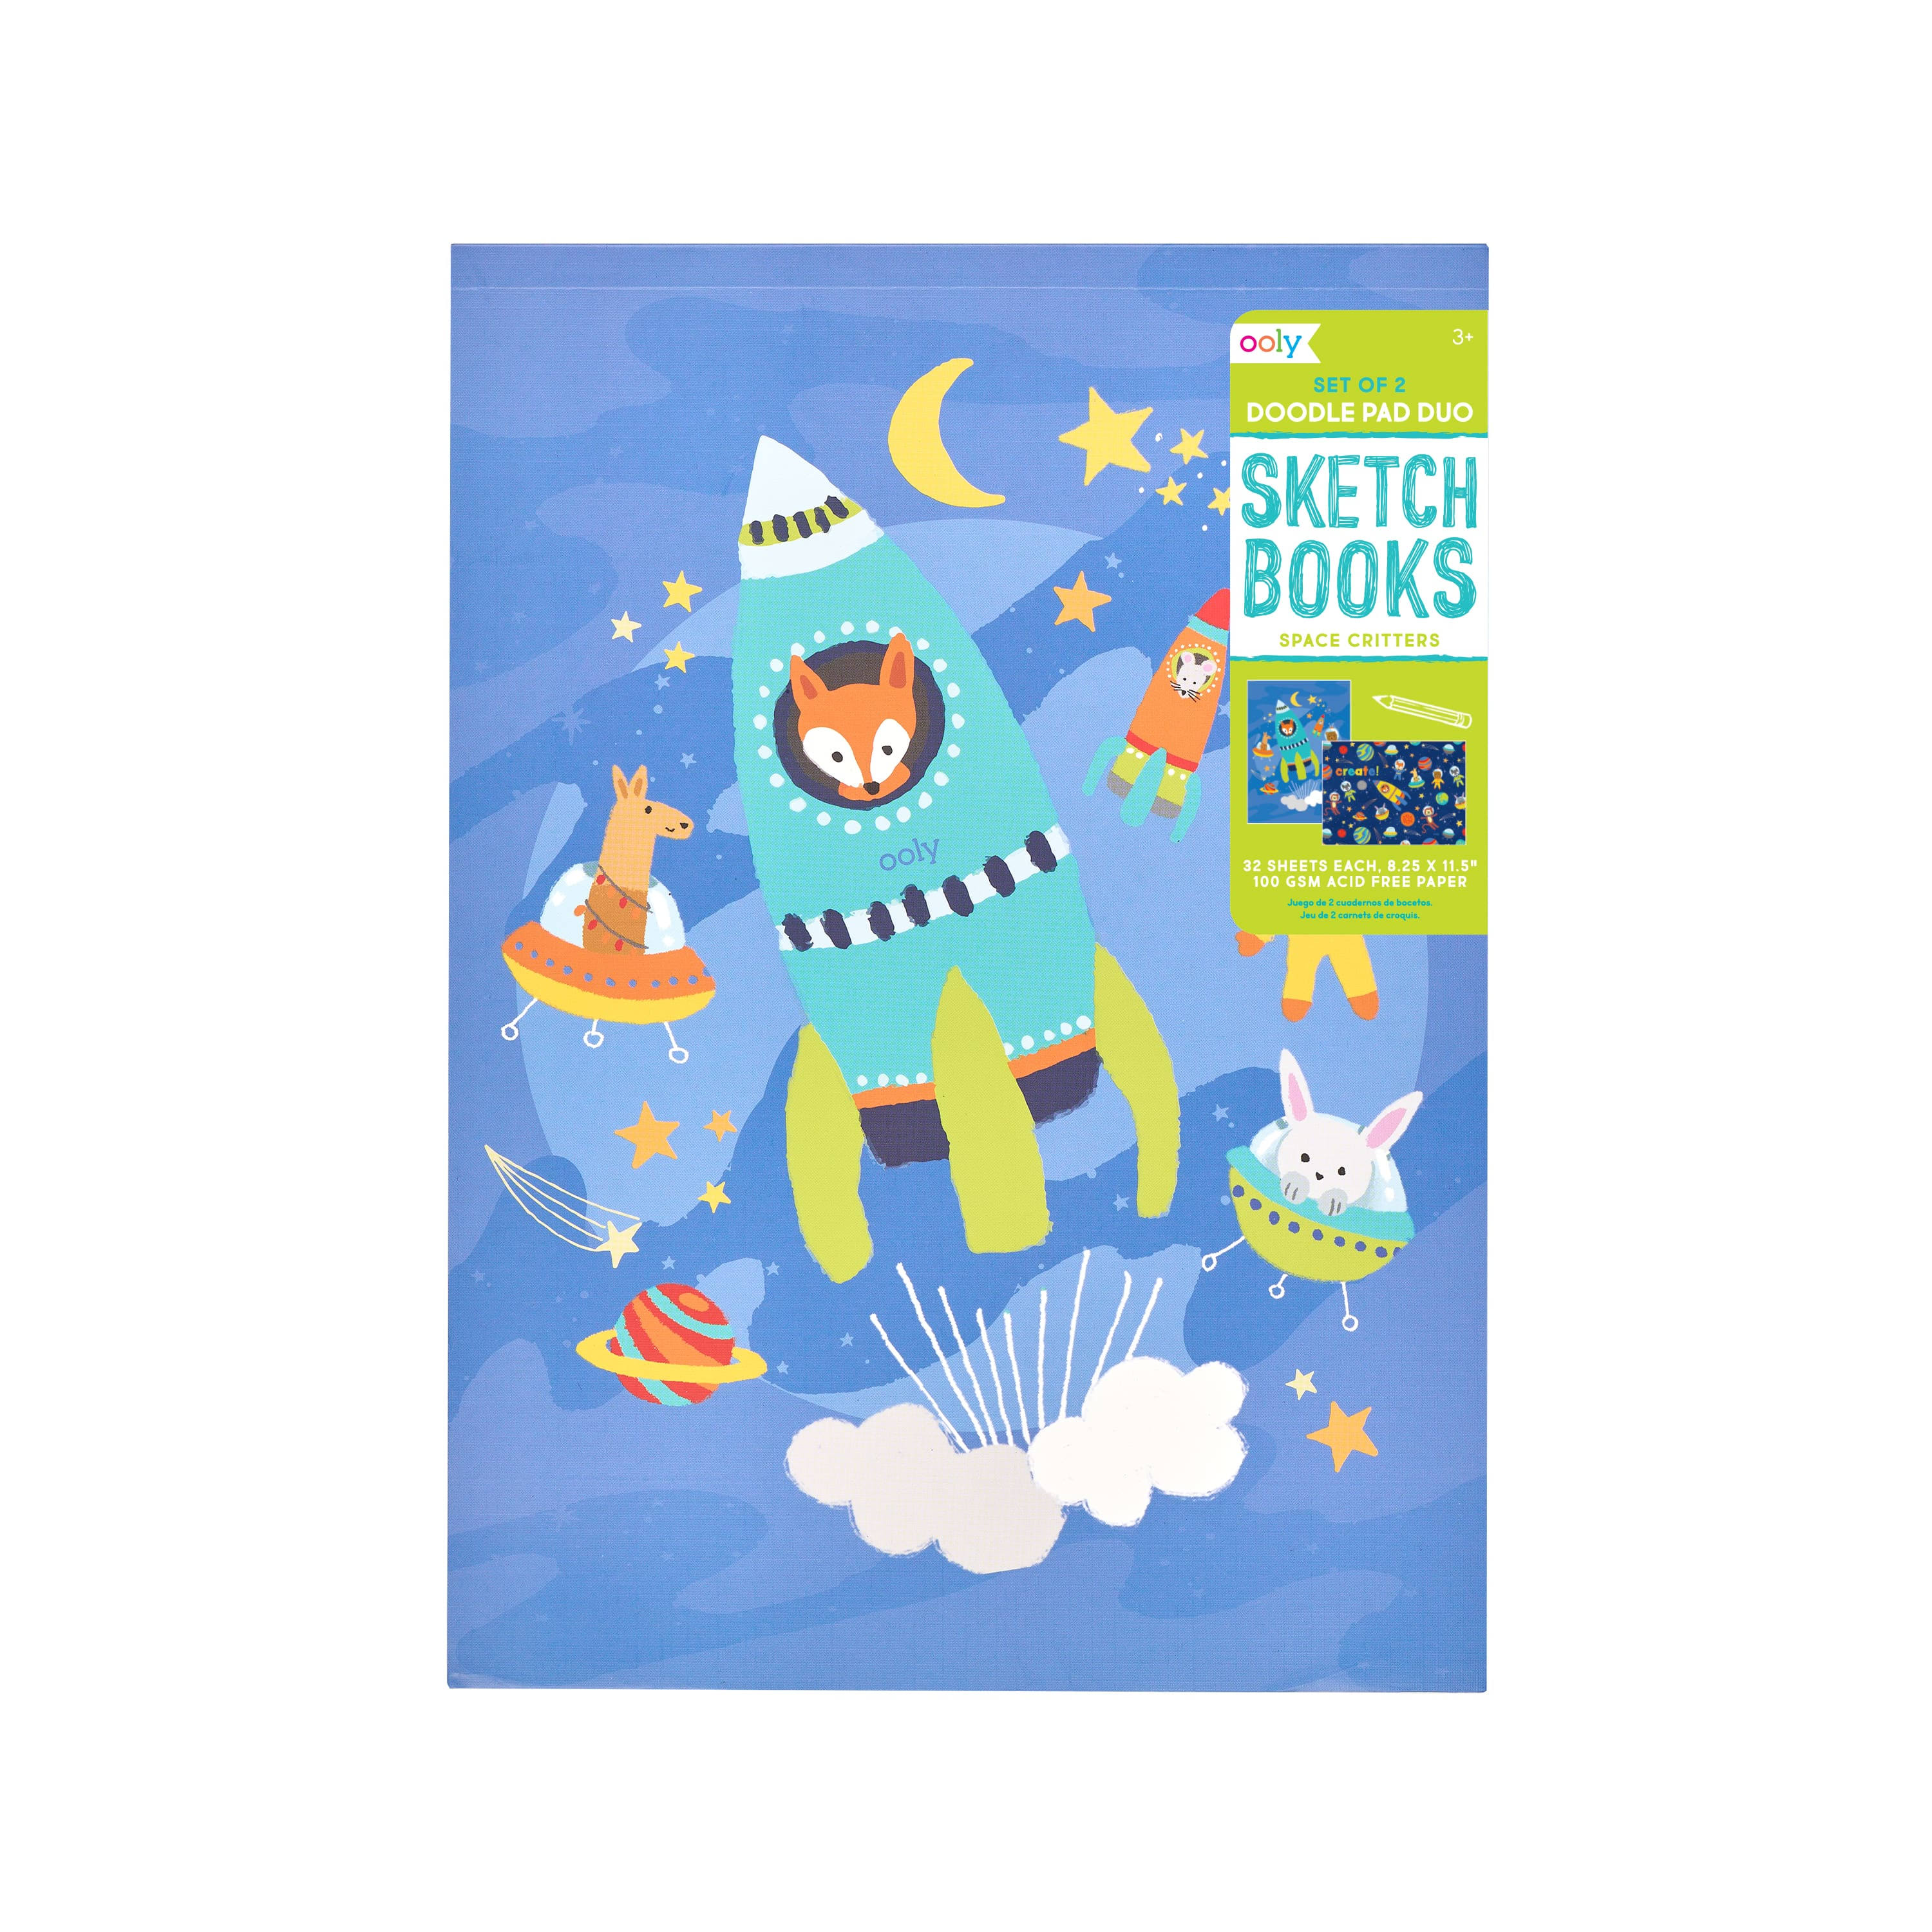 Ooly Doodle Pad Duo Sketchbooks: Space Critters - Set of 2